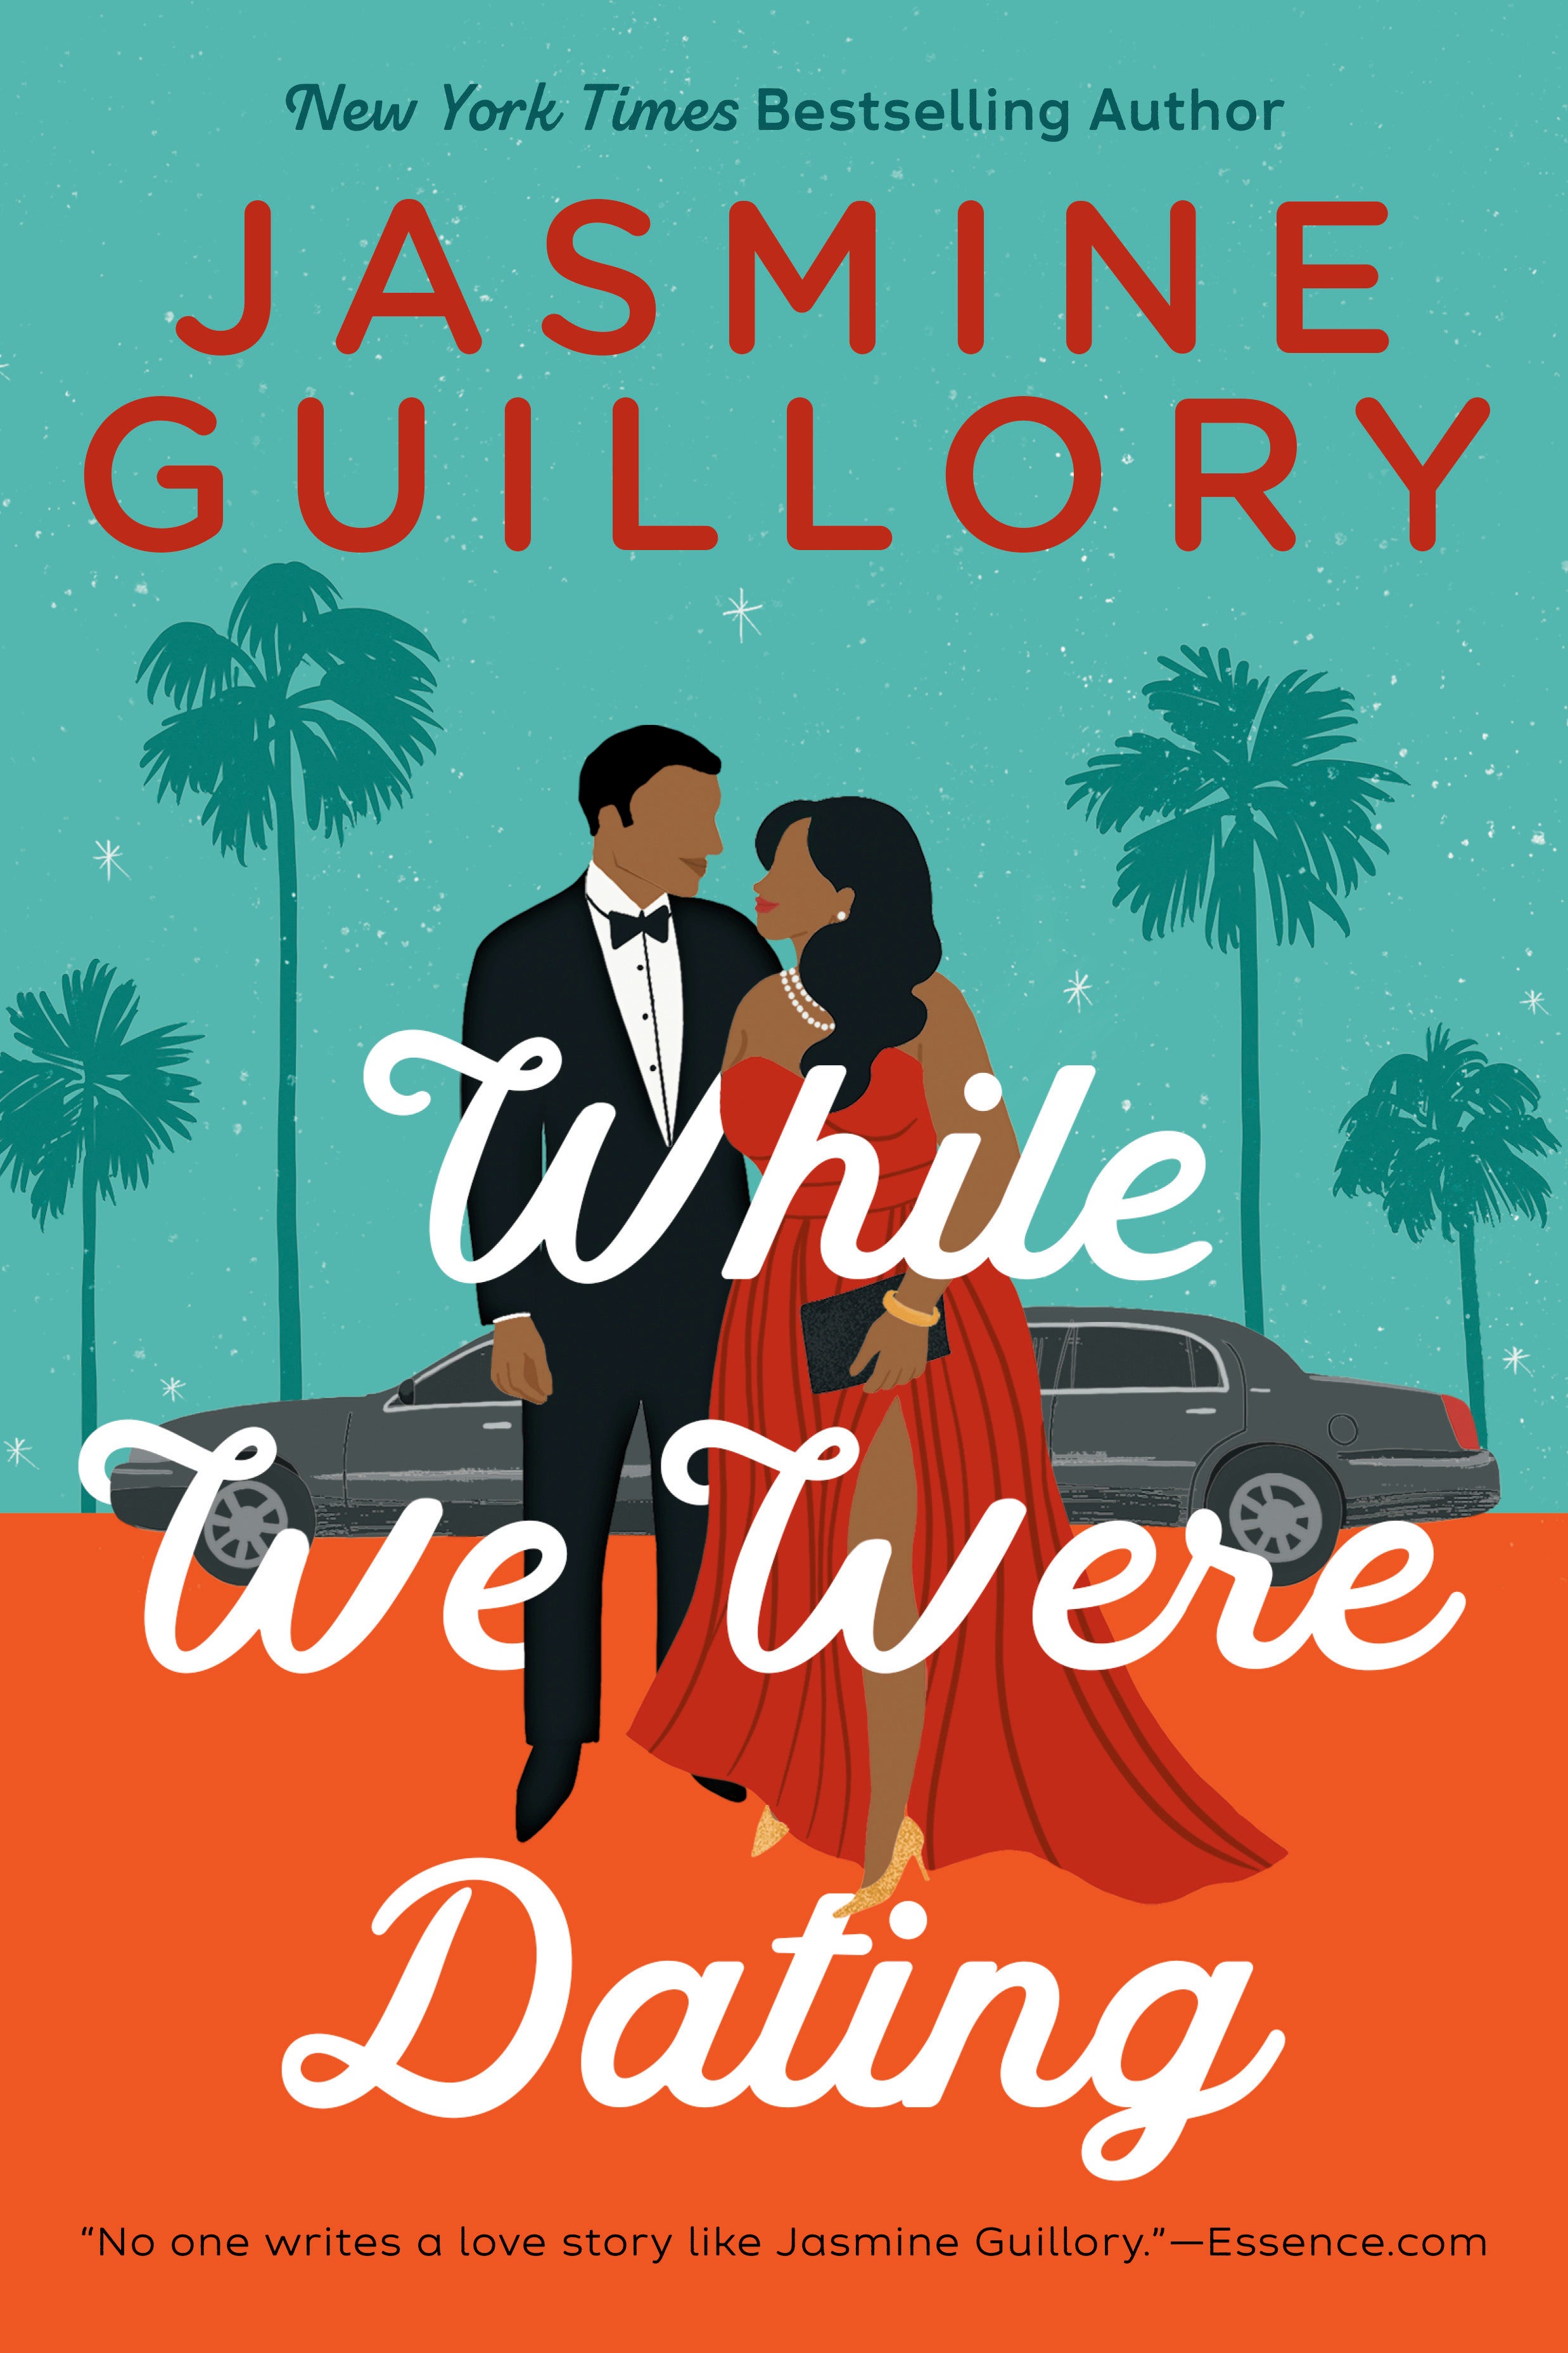 Book Review - While We Were Dating